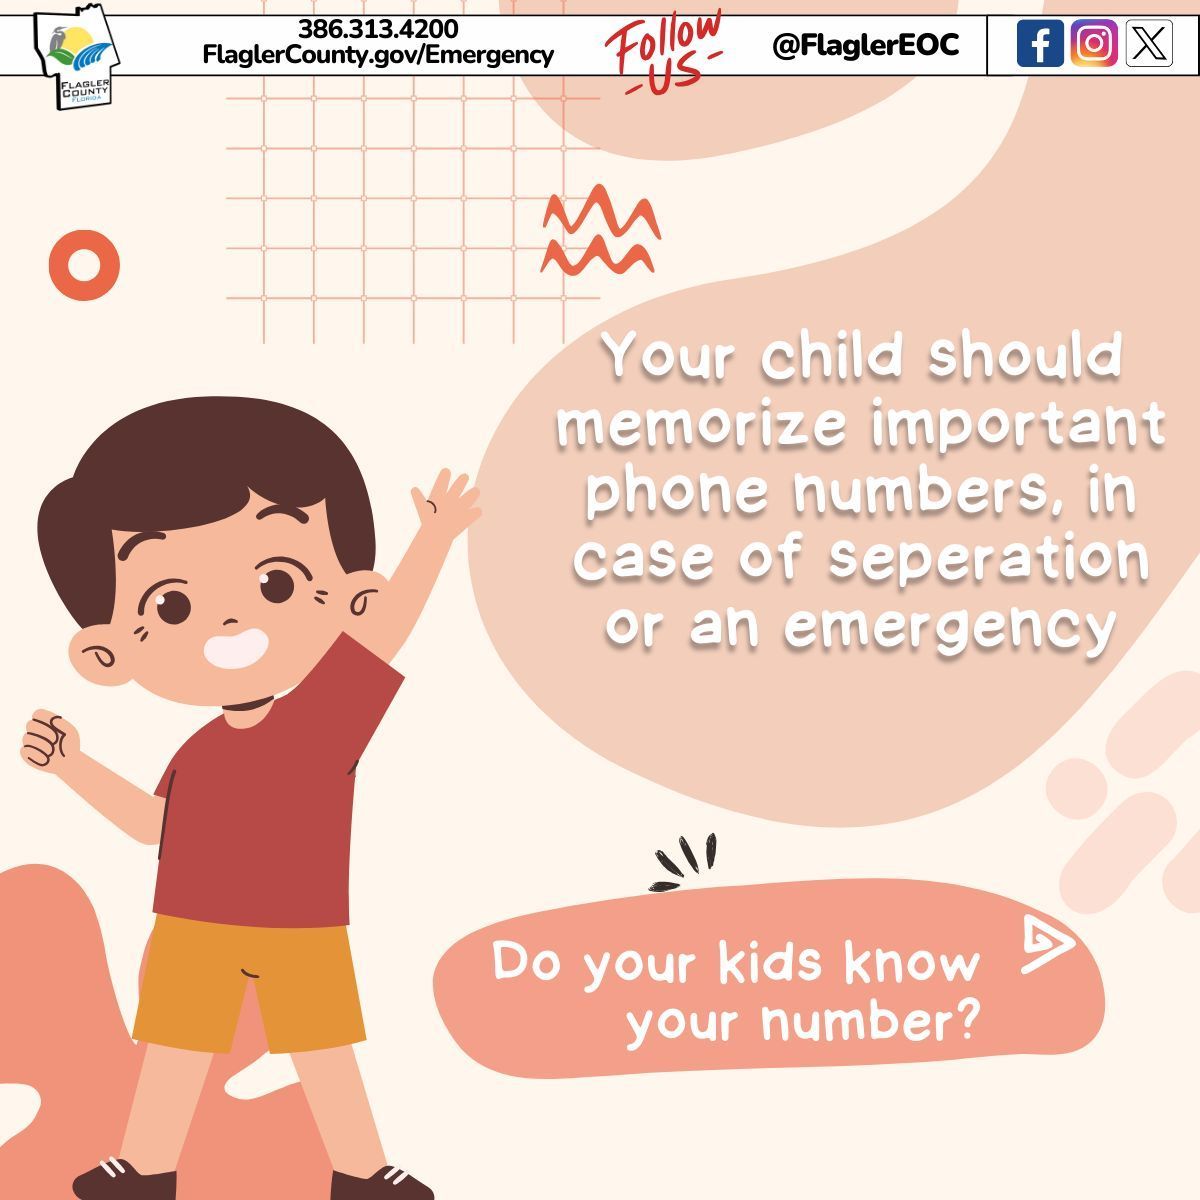 Children memorizing phone numbers is a part of building an emergency communications plan. An emergency can occur that separates you from your child. #FlaglerEOC #BeReady #communicate